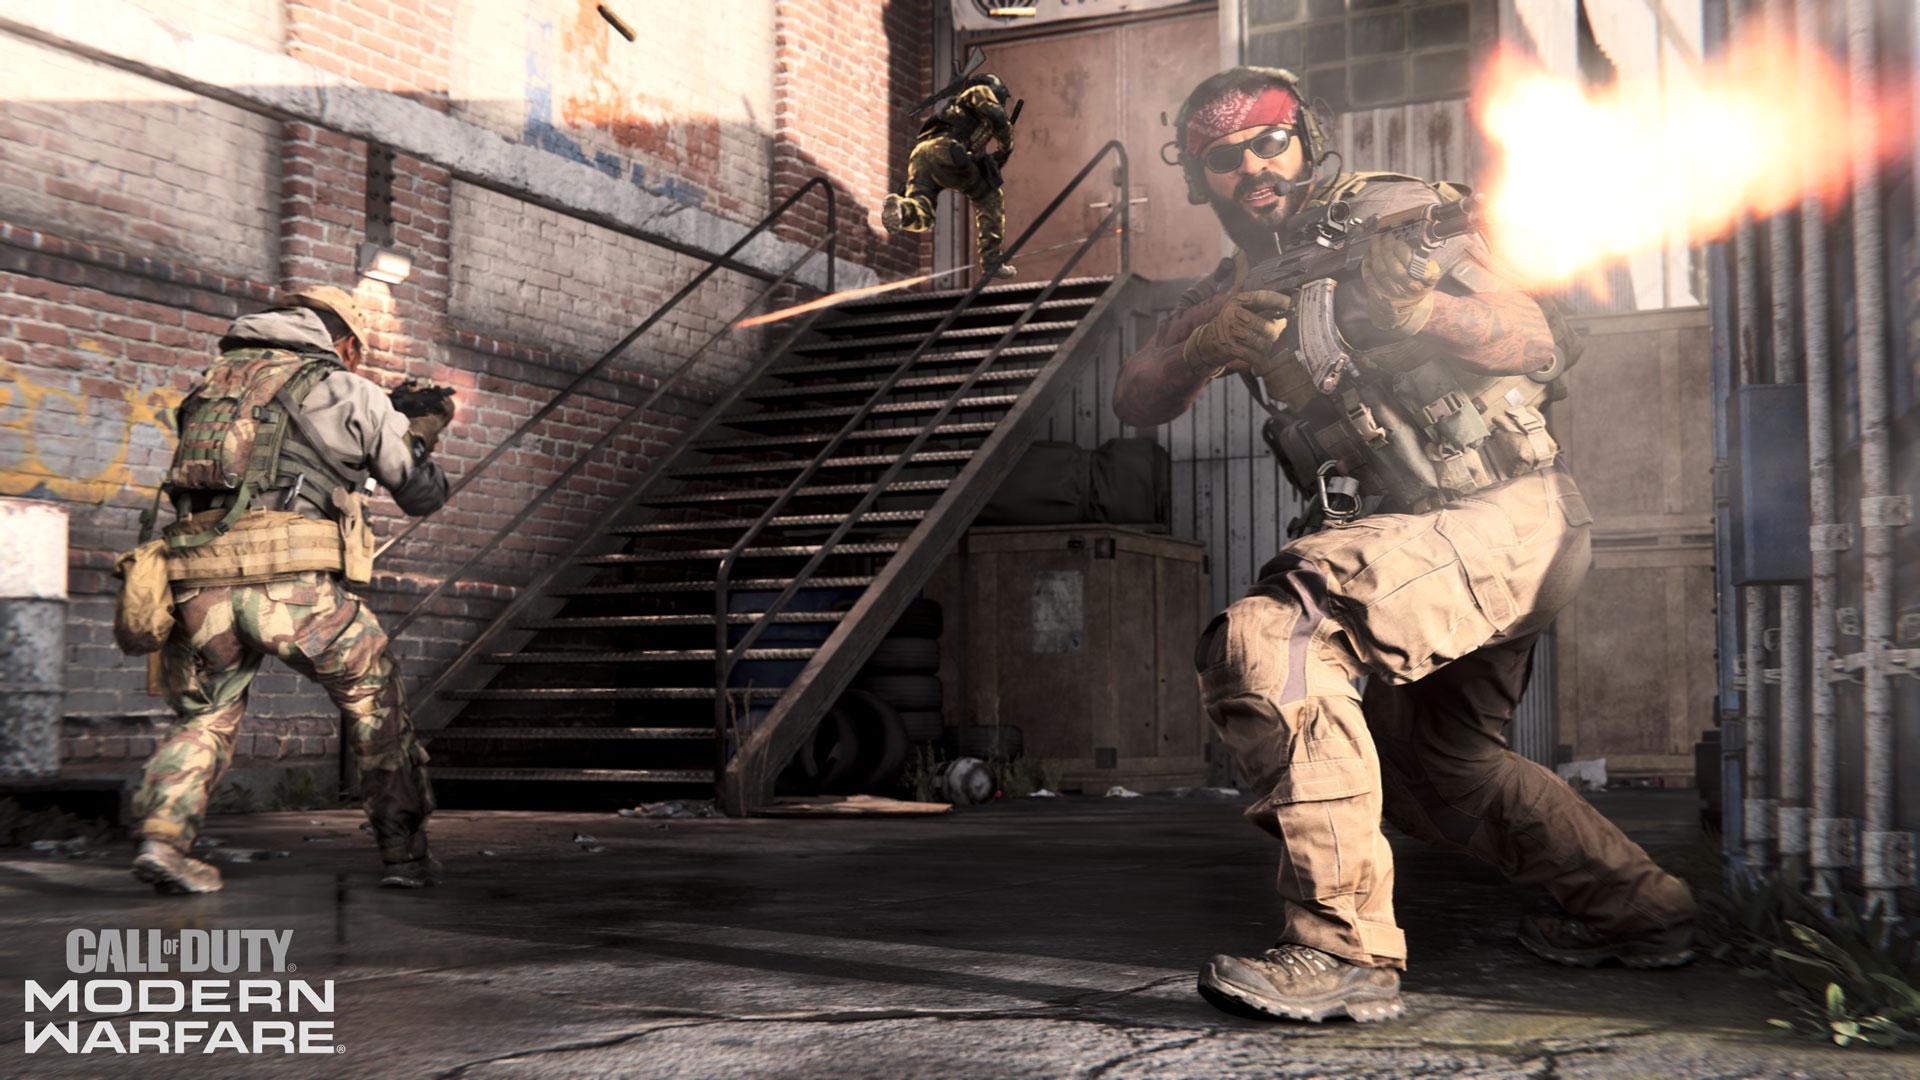 An image of characters fighting in Call of Duty Modern Warfare.